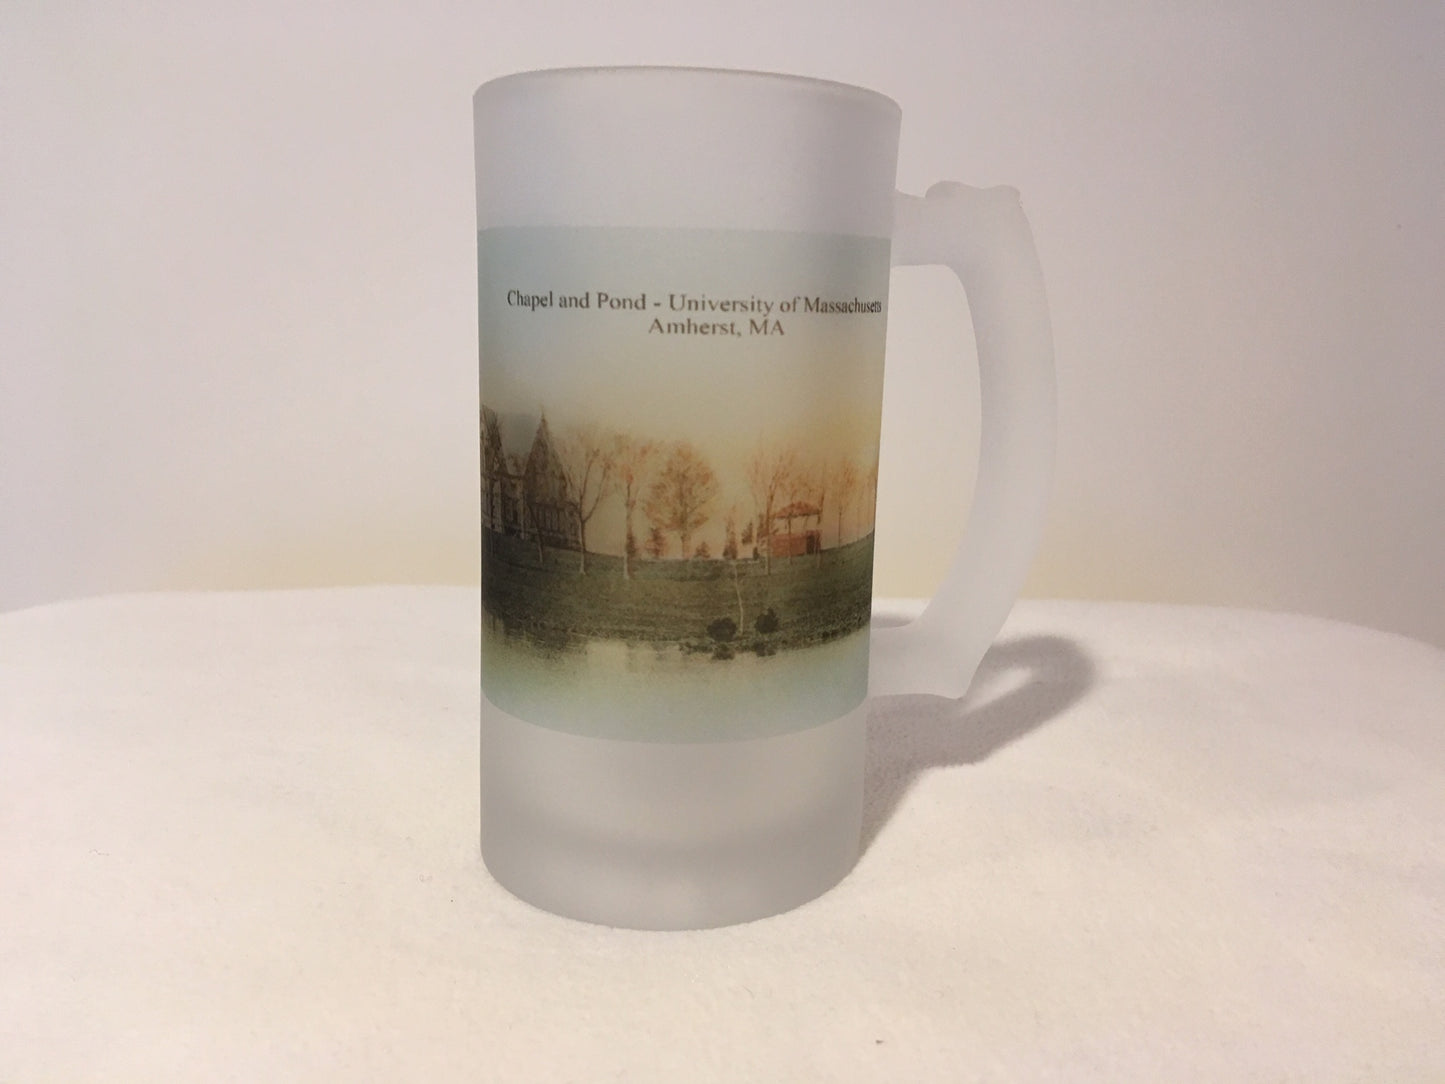 University of Massachusetts Beer Mug Featuring The Old Chapel - That Fabled Shore Home Decor